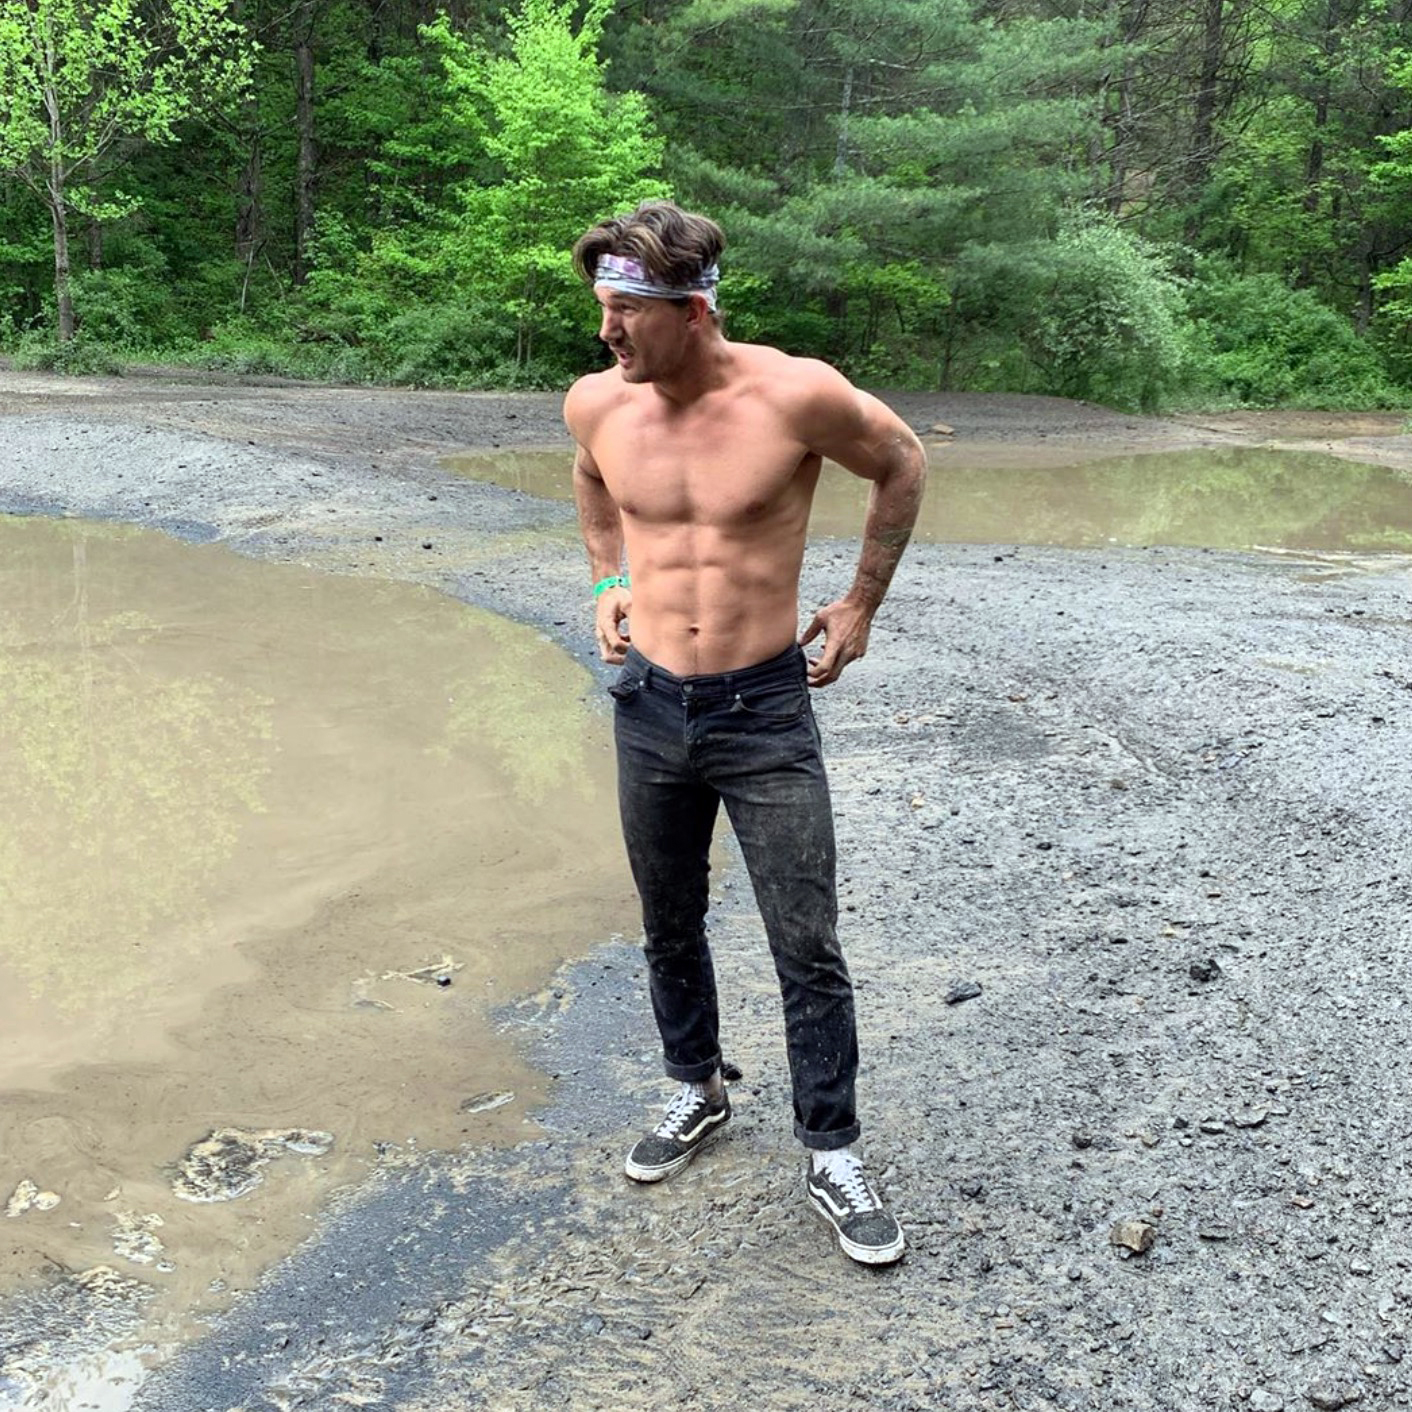 Tyler Cameron Shares Shirtless Pics Posts About Finding My Own Way